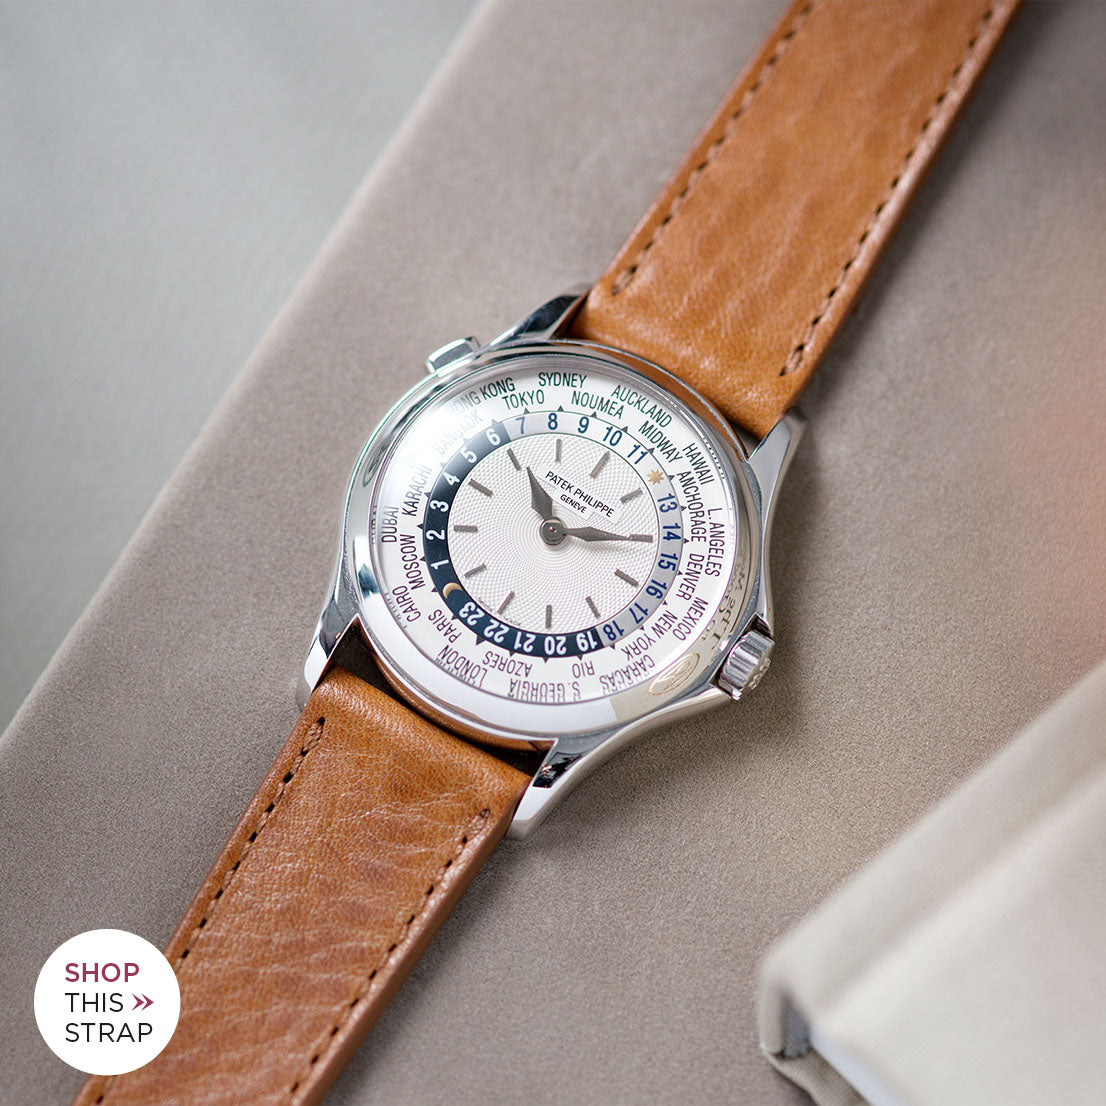 Bulang and Sons_Strap Guide _Patek Philippe 5110G White Gold World Time_Gilt Brown Tonal Leather Watch Strap